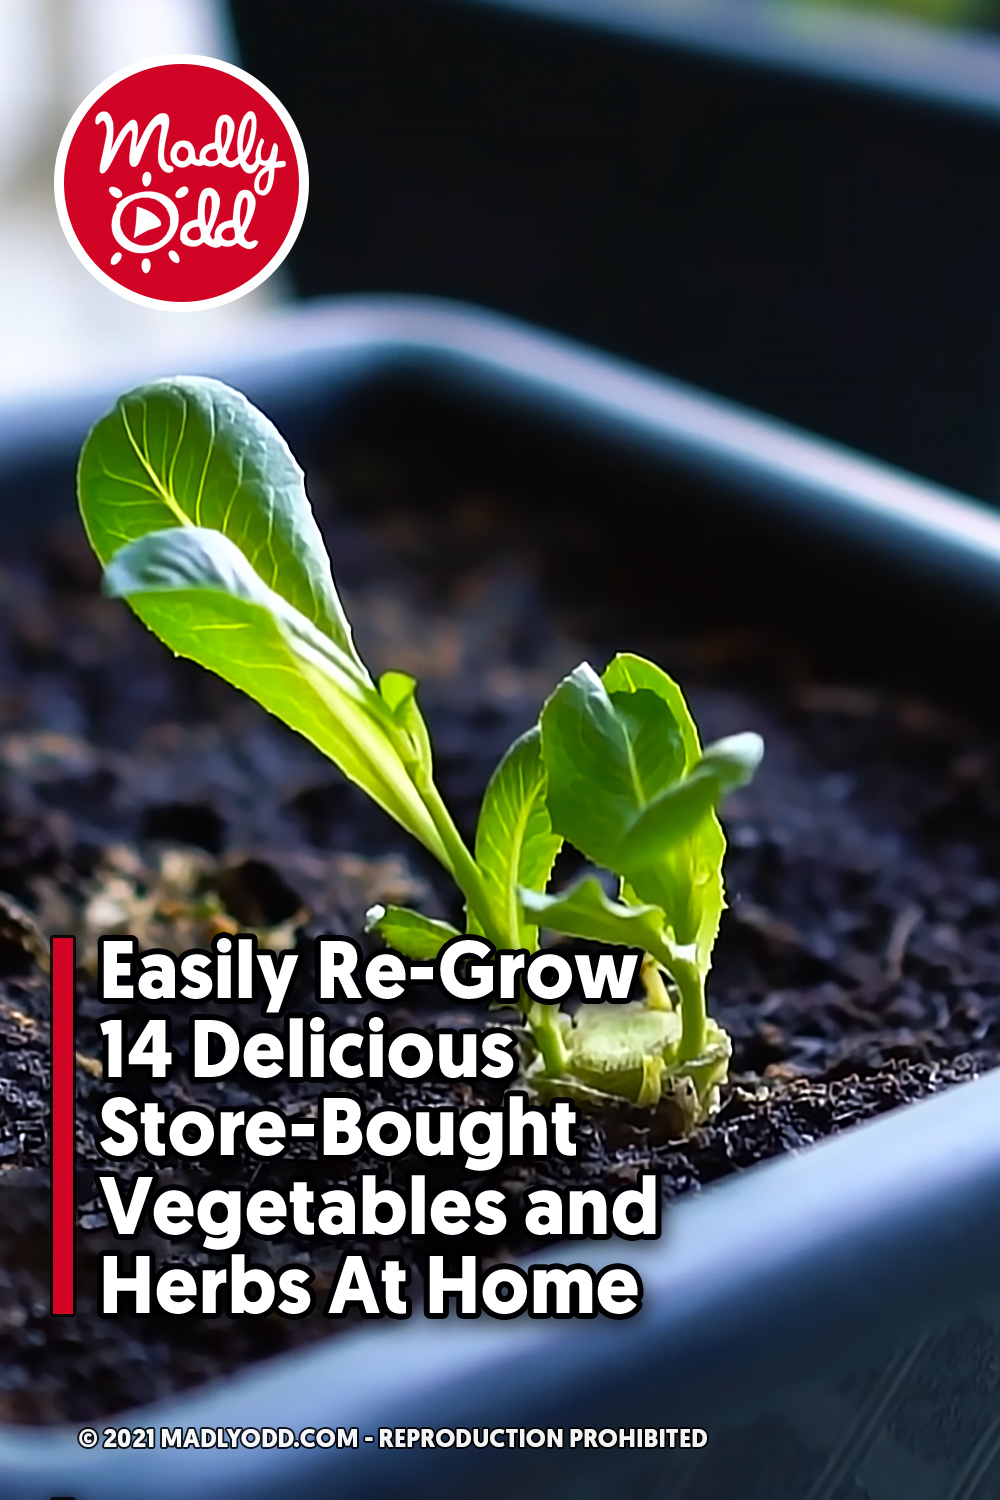 Easily Re-Grow 14 Delicious Store-Bought Vegetables and Herbs At Home